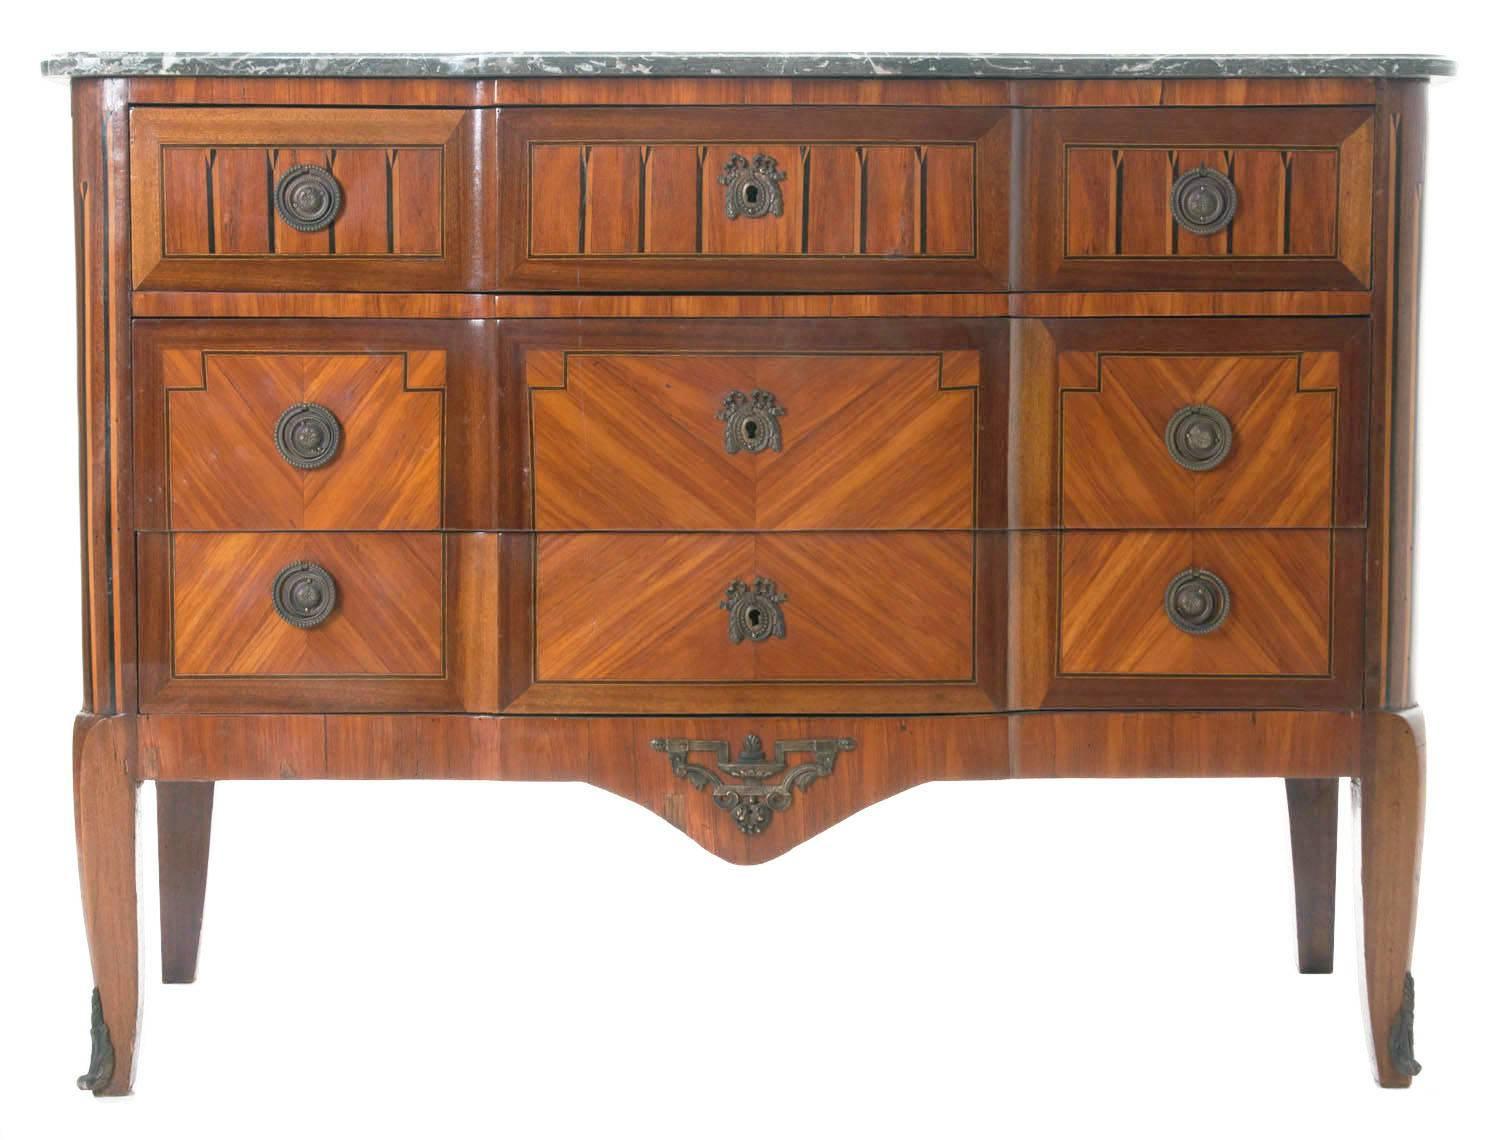 A gorgeous small commode of transitional taste with a colorful marble top, shaped to fit gracefully over the three drawer commode. Impressive and detailed wood designs are found all over this beauty, primarily in mahogany for the book matched sides